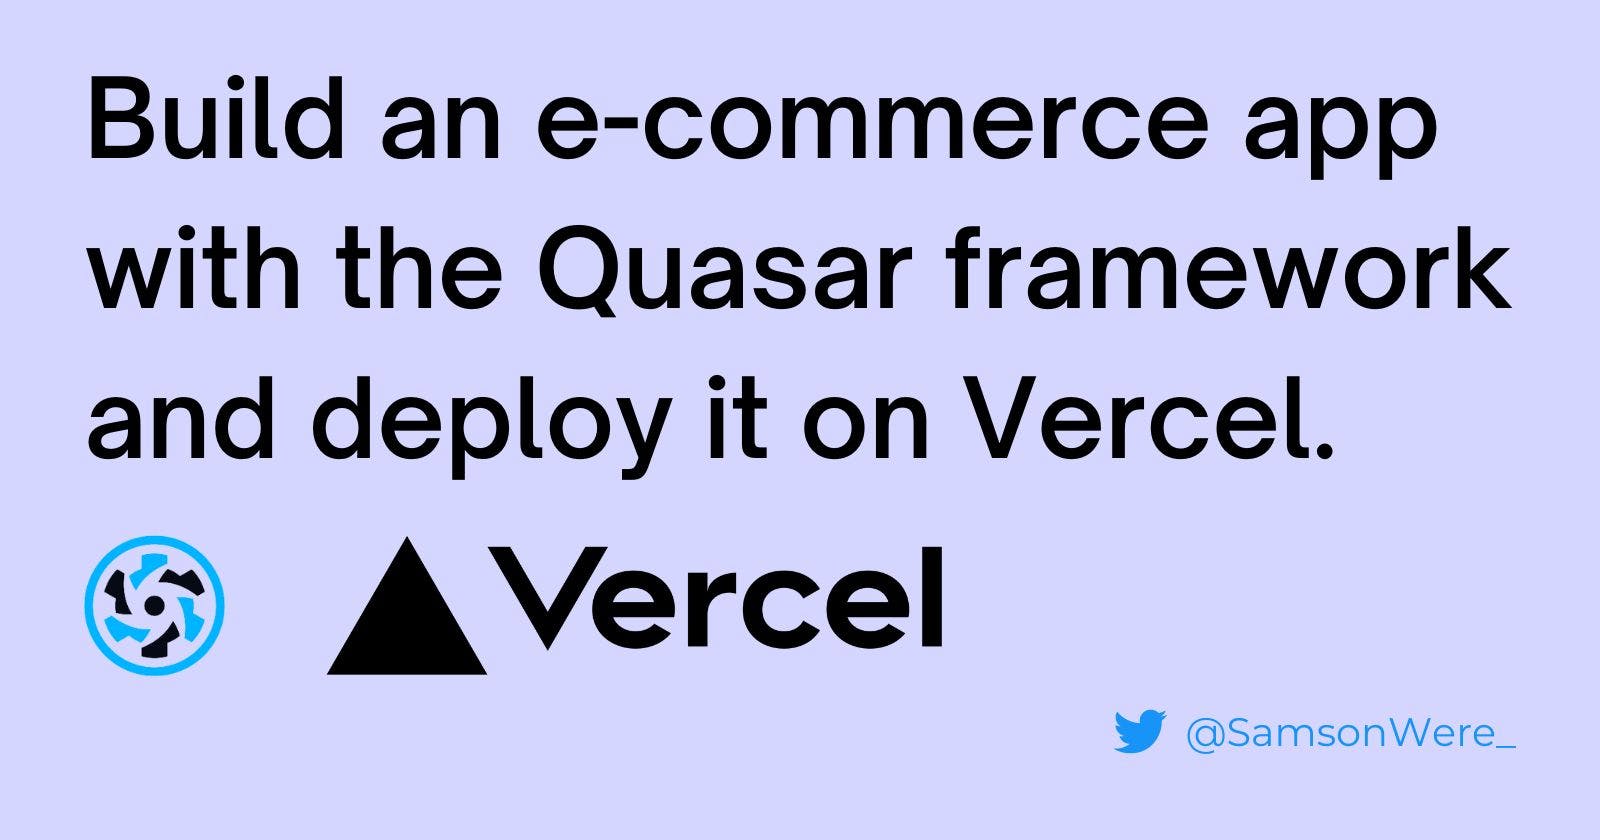 Build an e-commerce app with the Quasar framework and deploy it on Vercel.